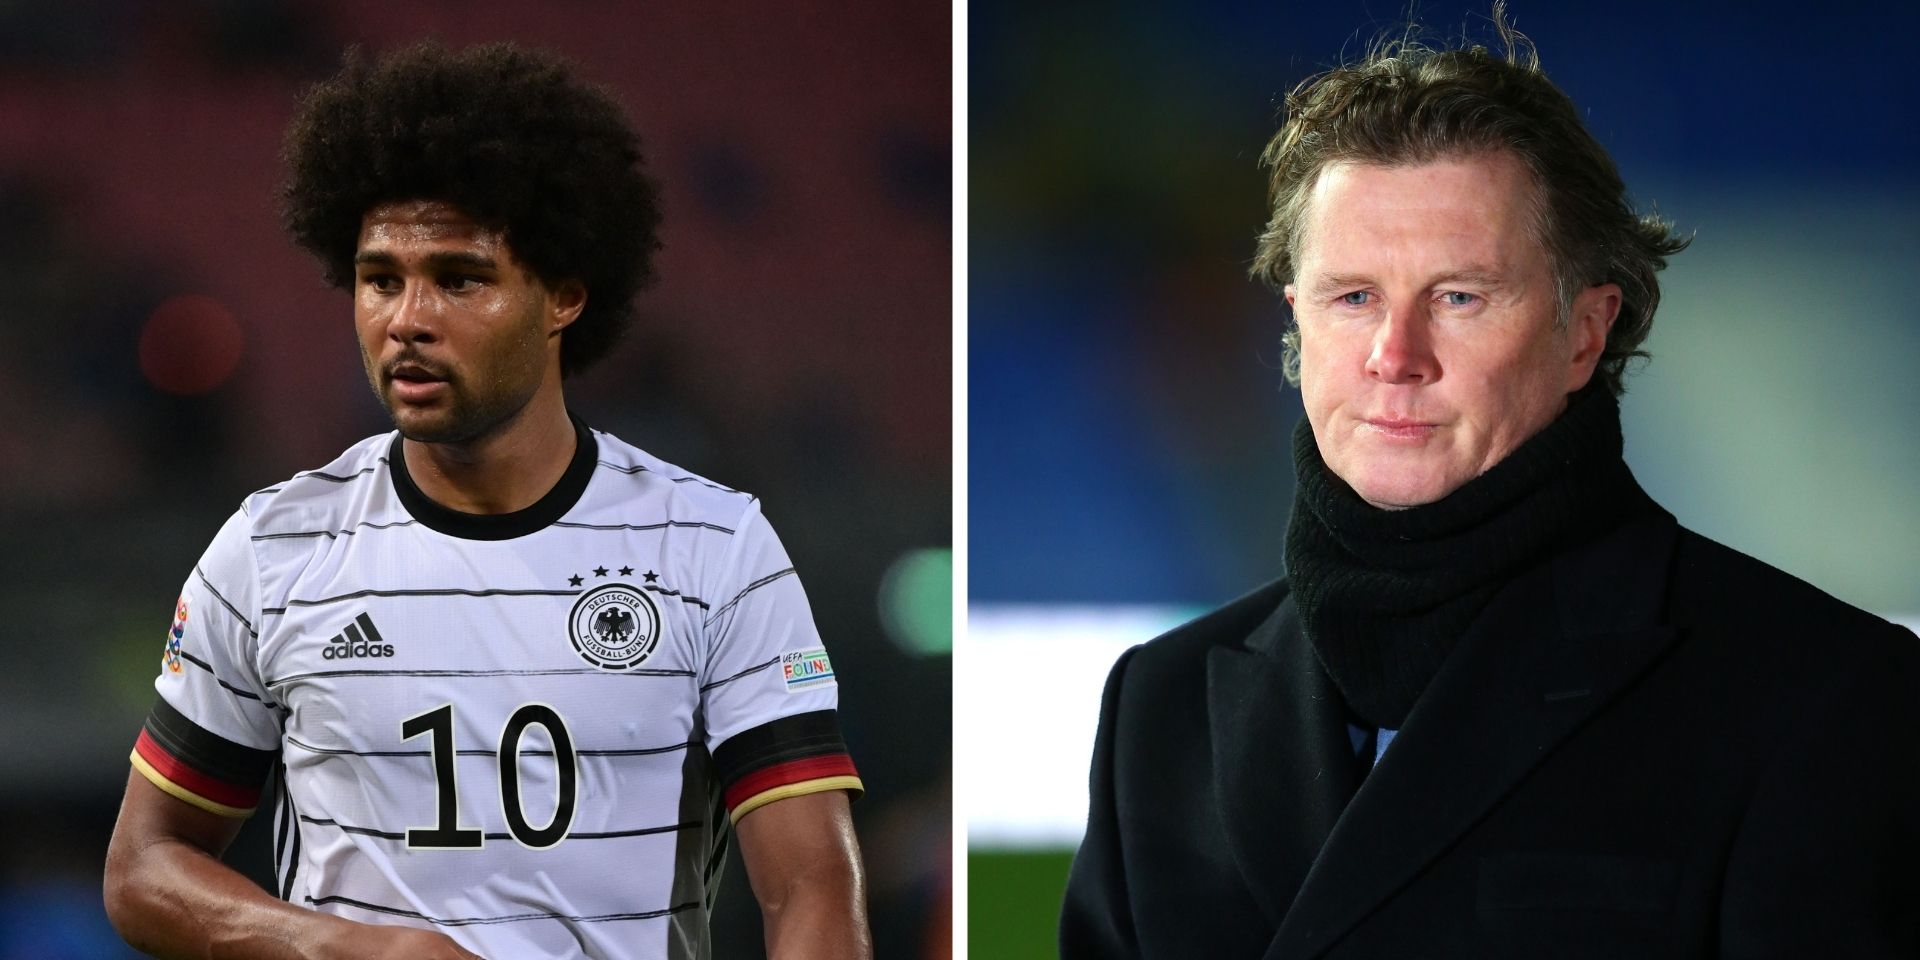 Steve McManaman calls for Liverpool to ‘accommodate’ Bundesliga star who could ‘offer something a bit different’ for Klopp